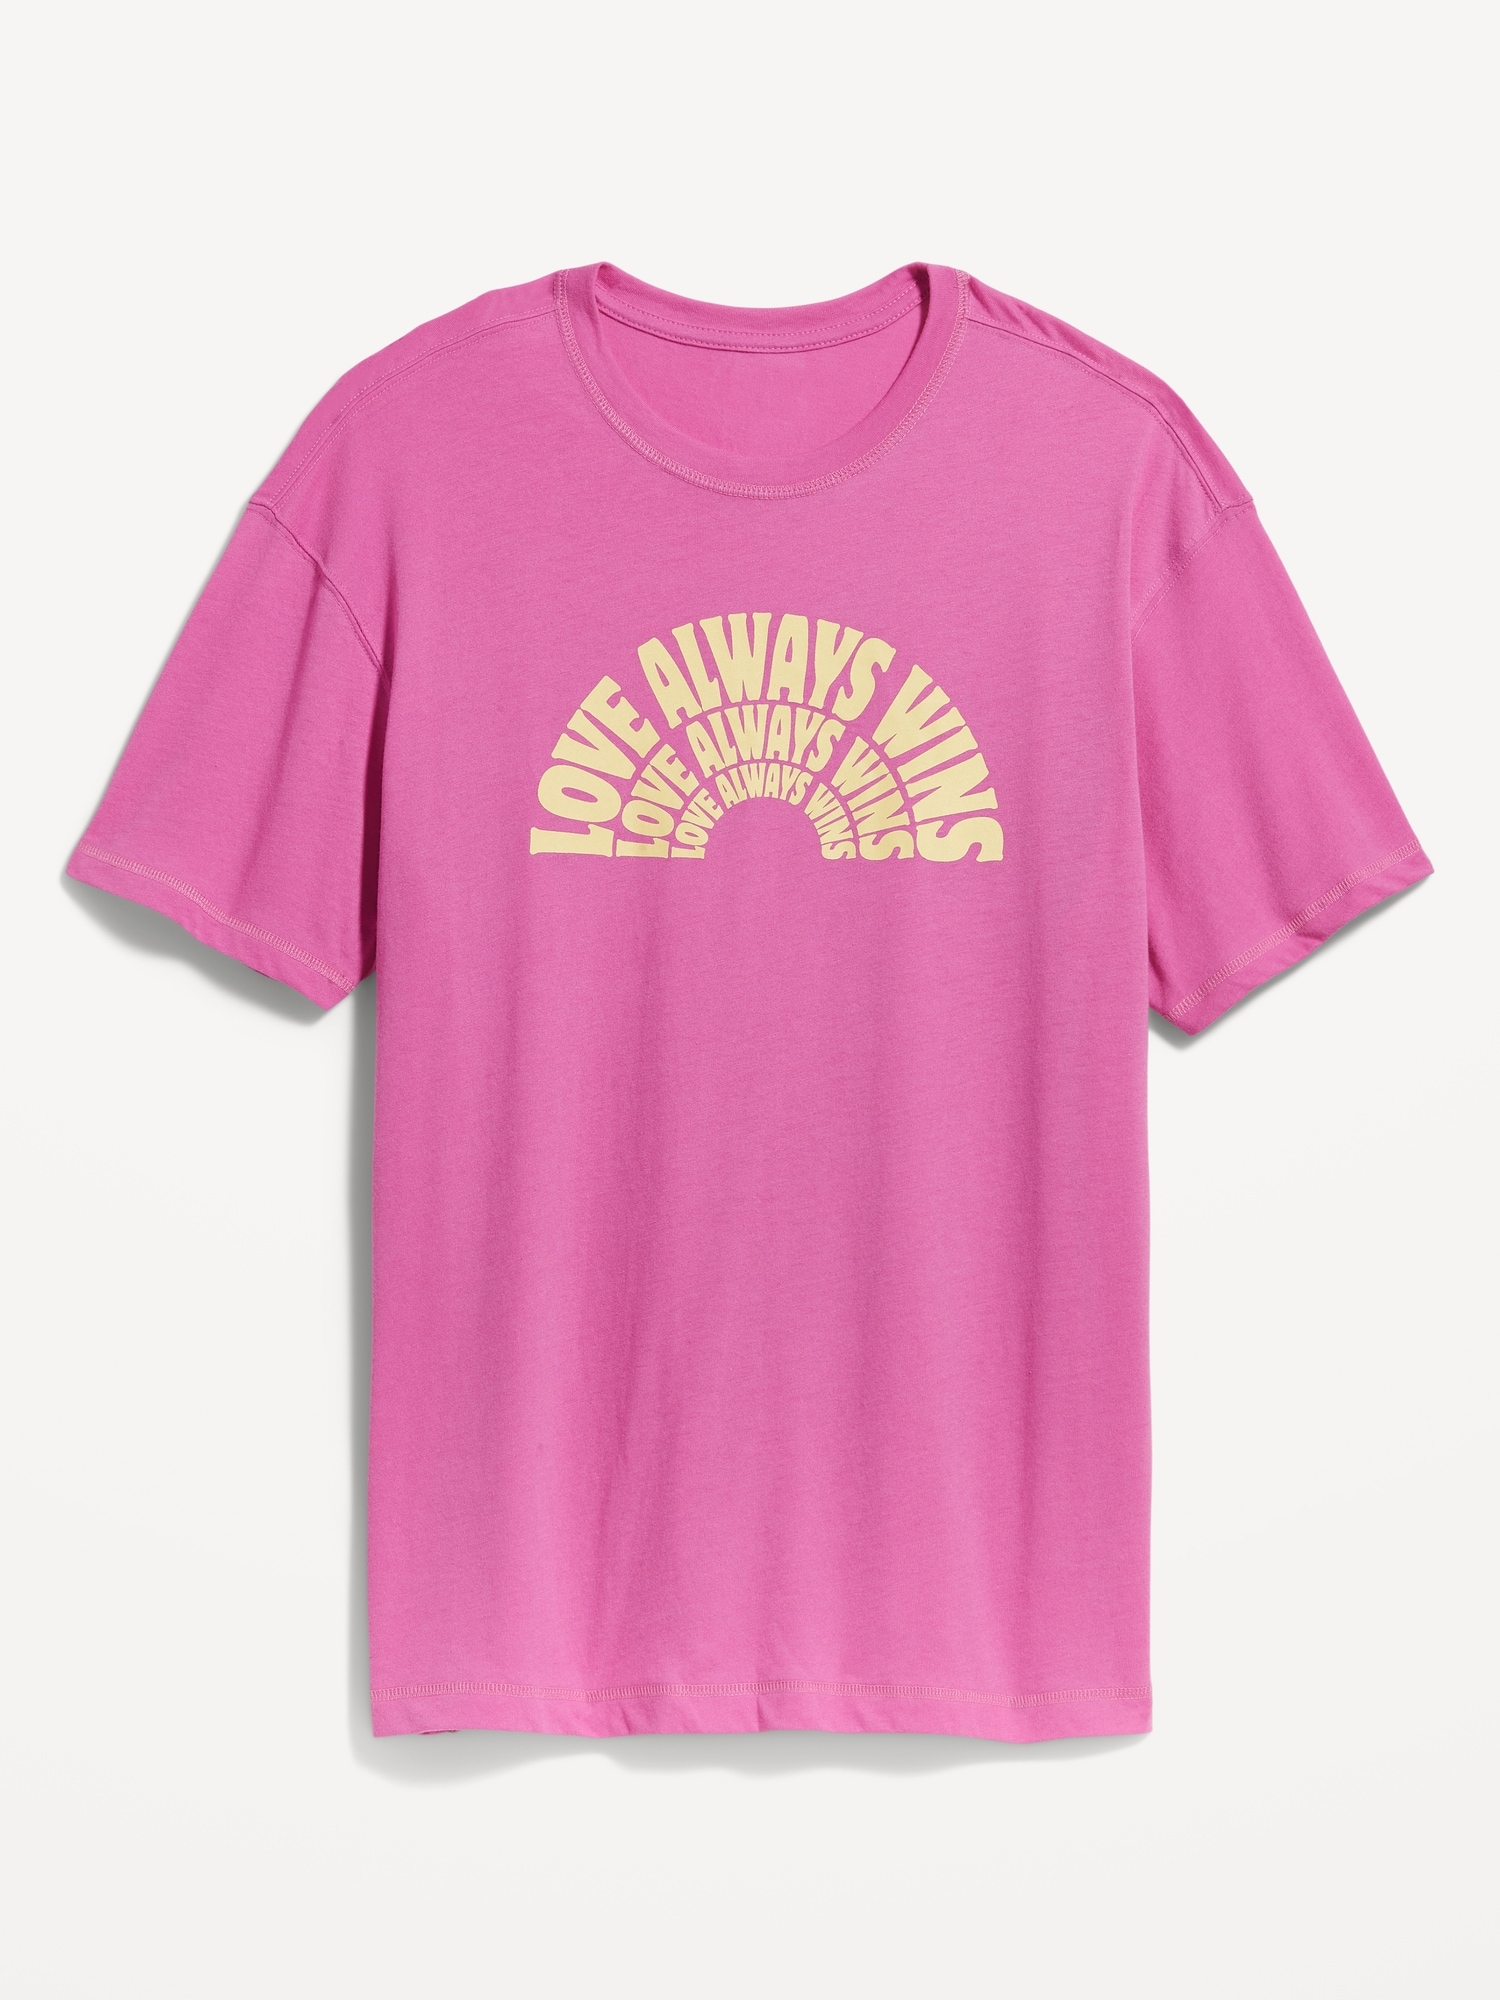 Old Navy Matching Pride Gender-Neutral T-Shirt for Adults pink. 1